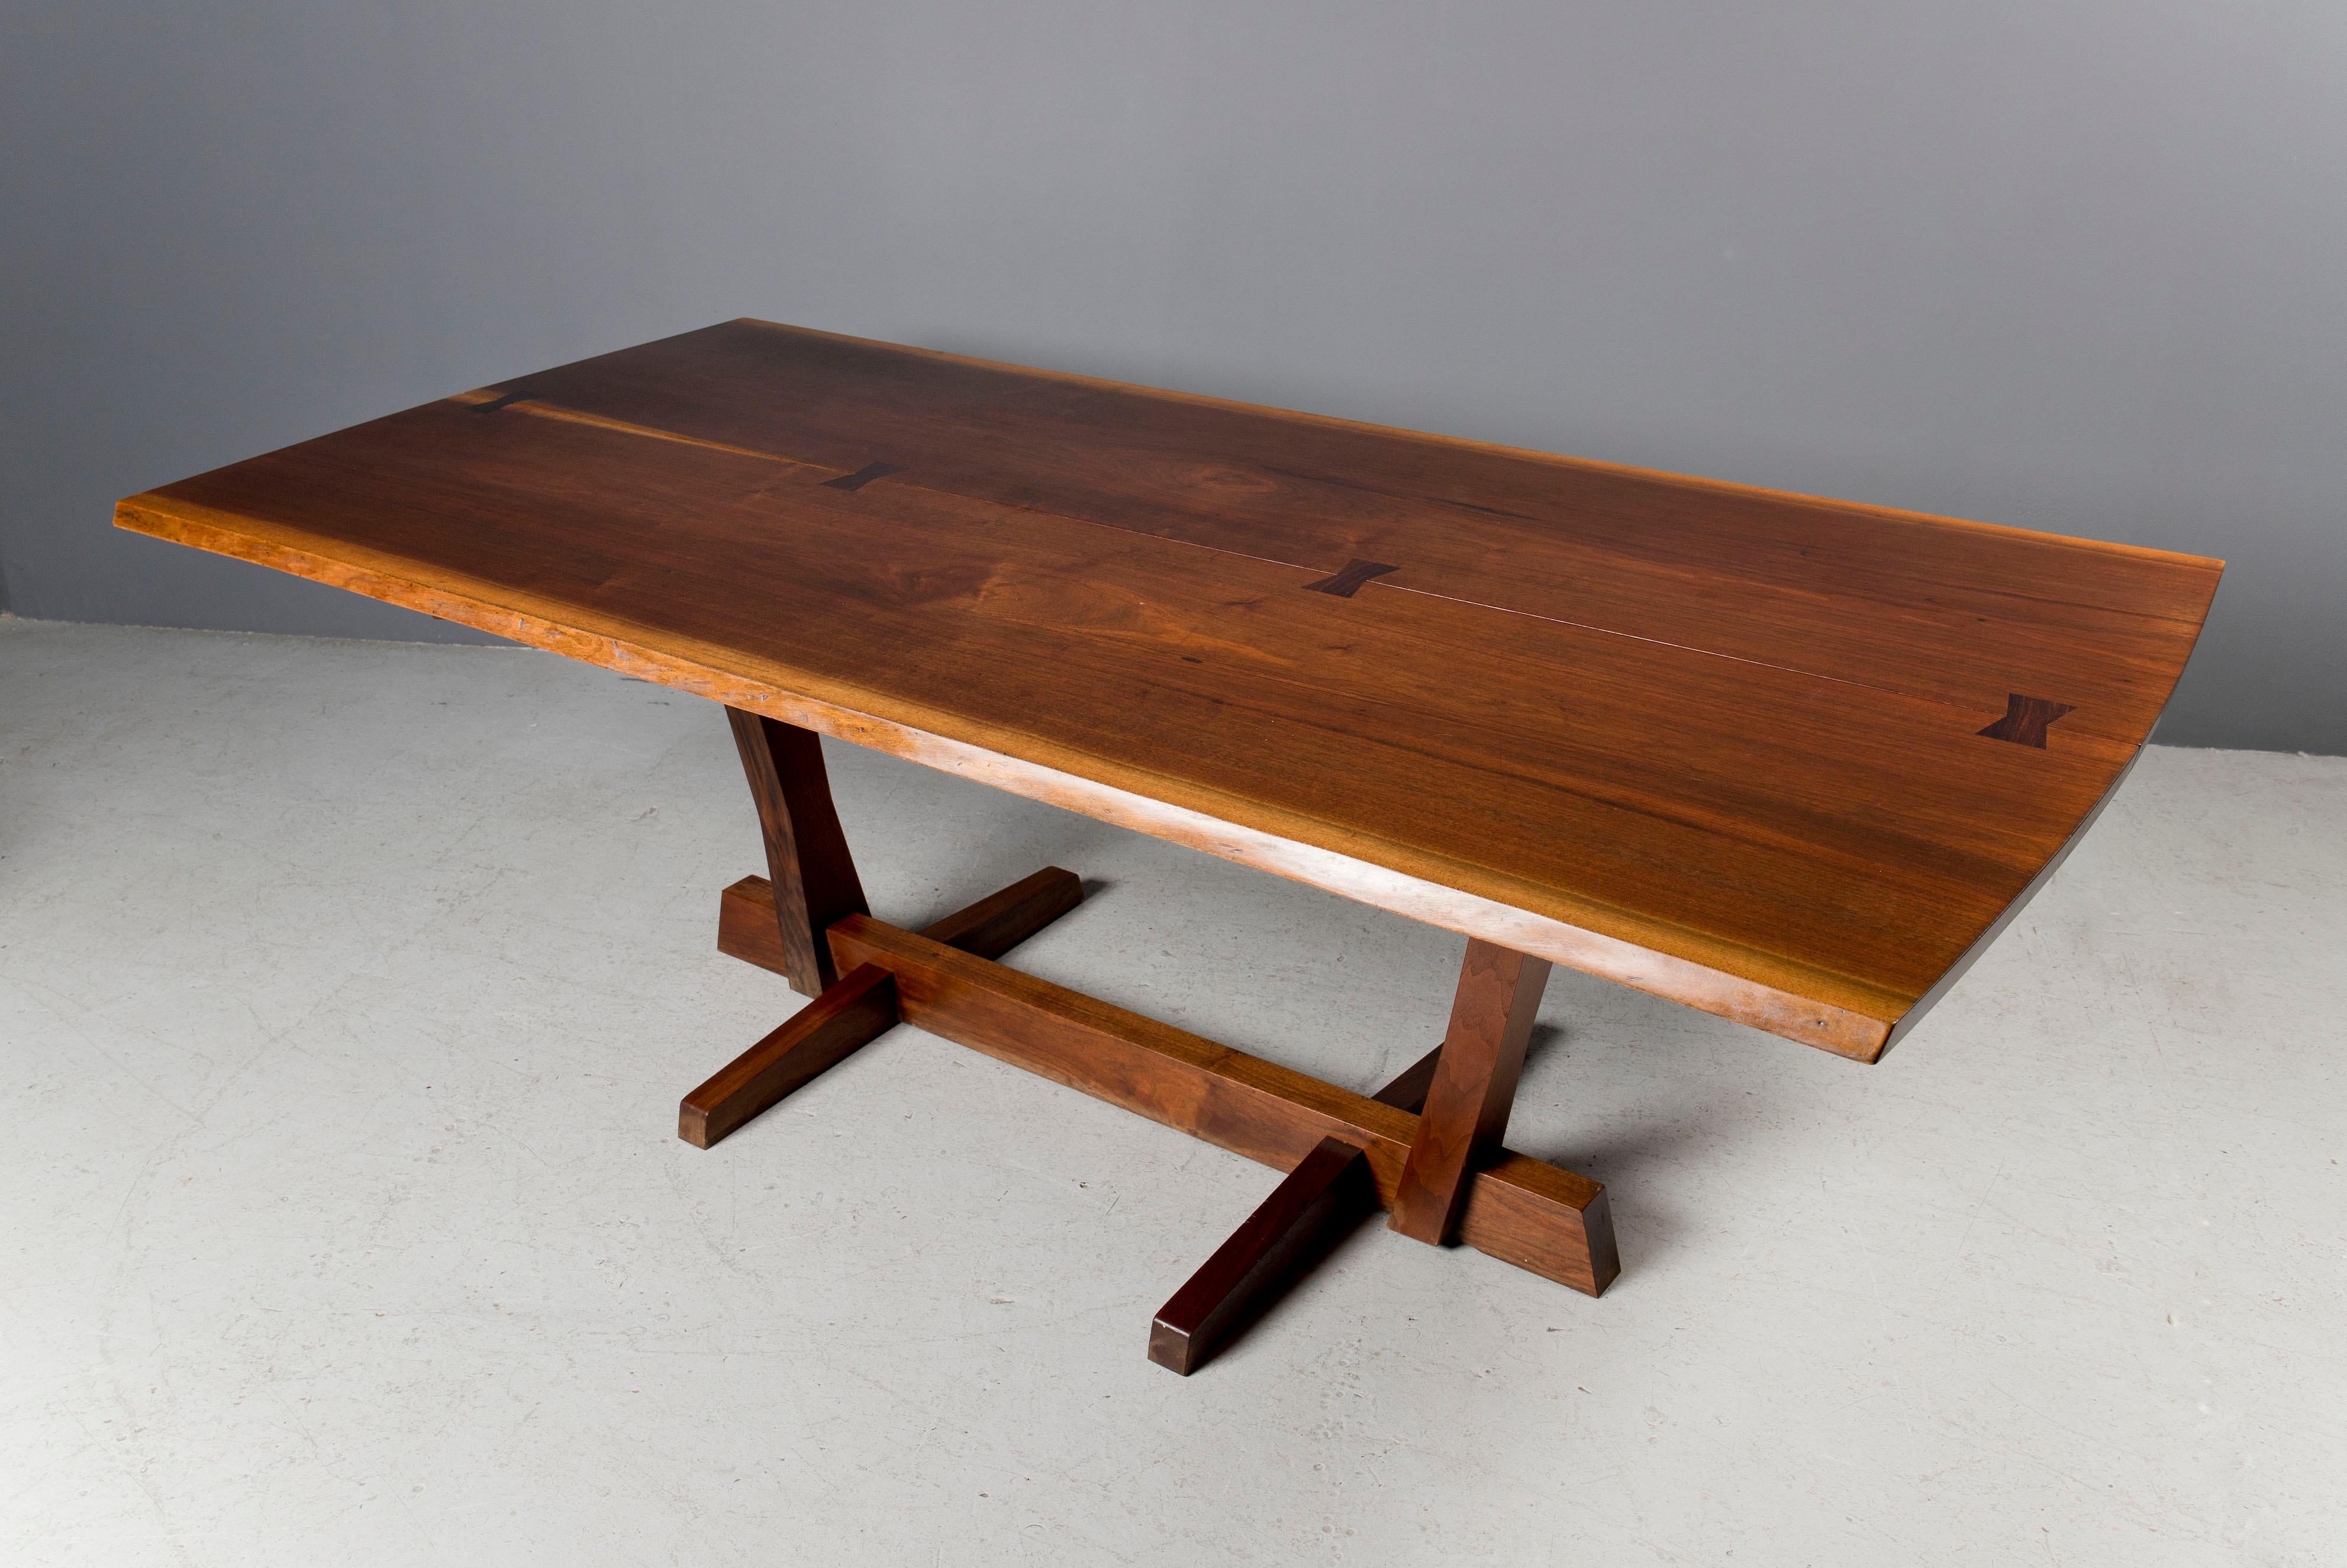 Exquisite two slab black walnut George Nakashima conoid base dining table. The top is book matched and features four rosewood butterflies. 

A digital copy of the original order card is available upon request.